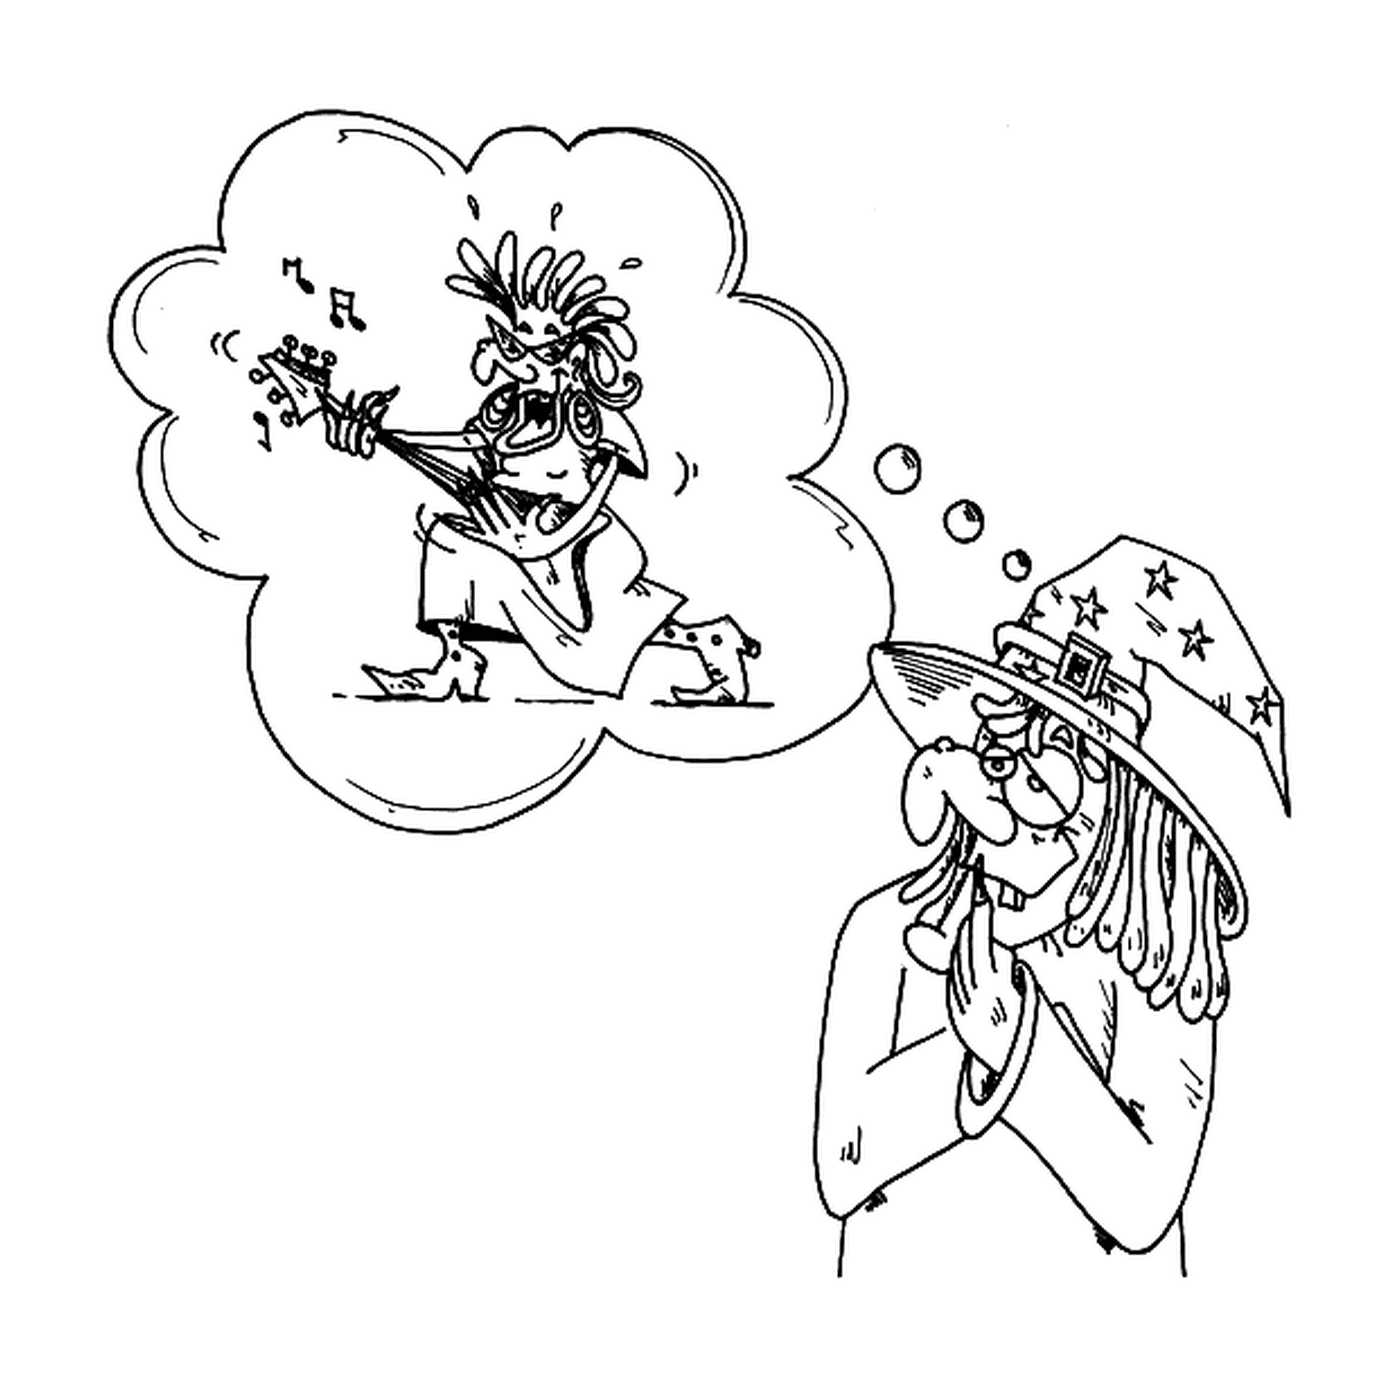  witch dreaming of becoming a rockstar 